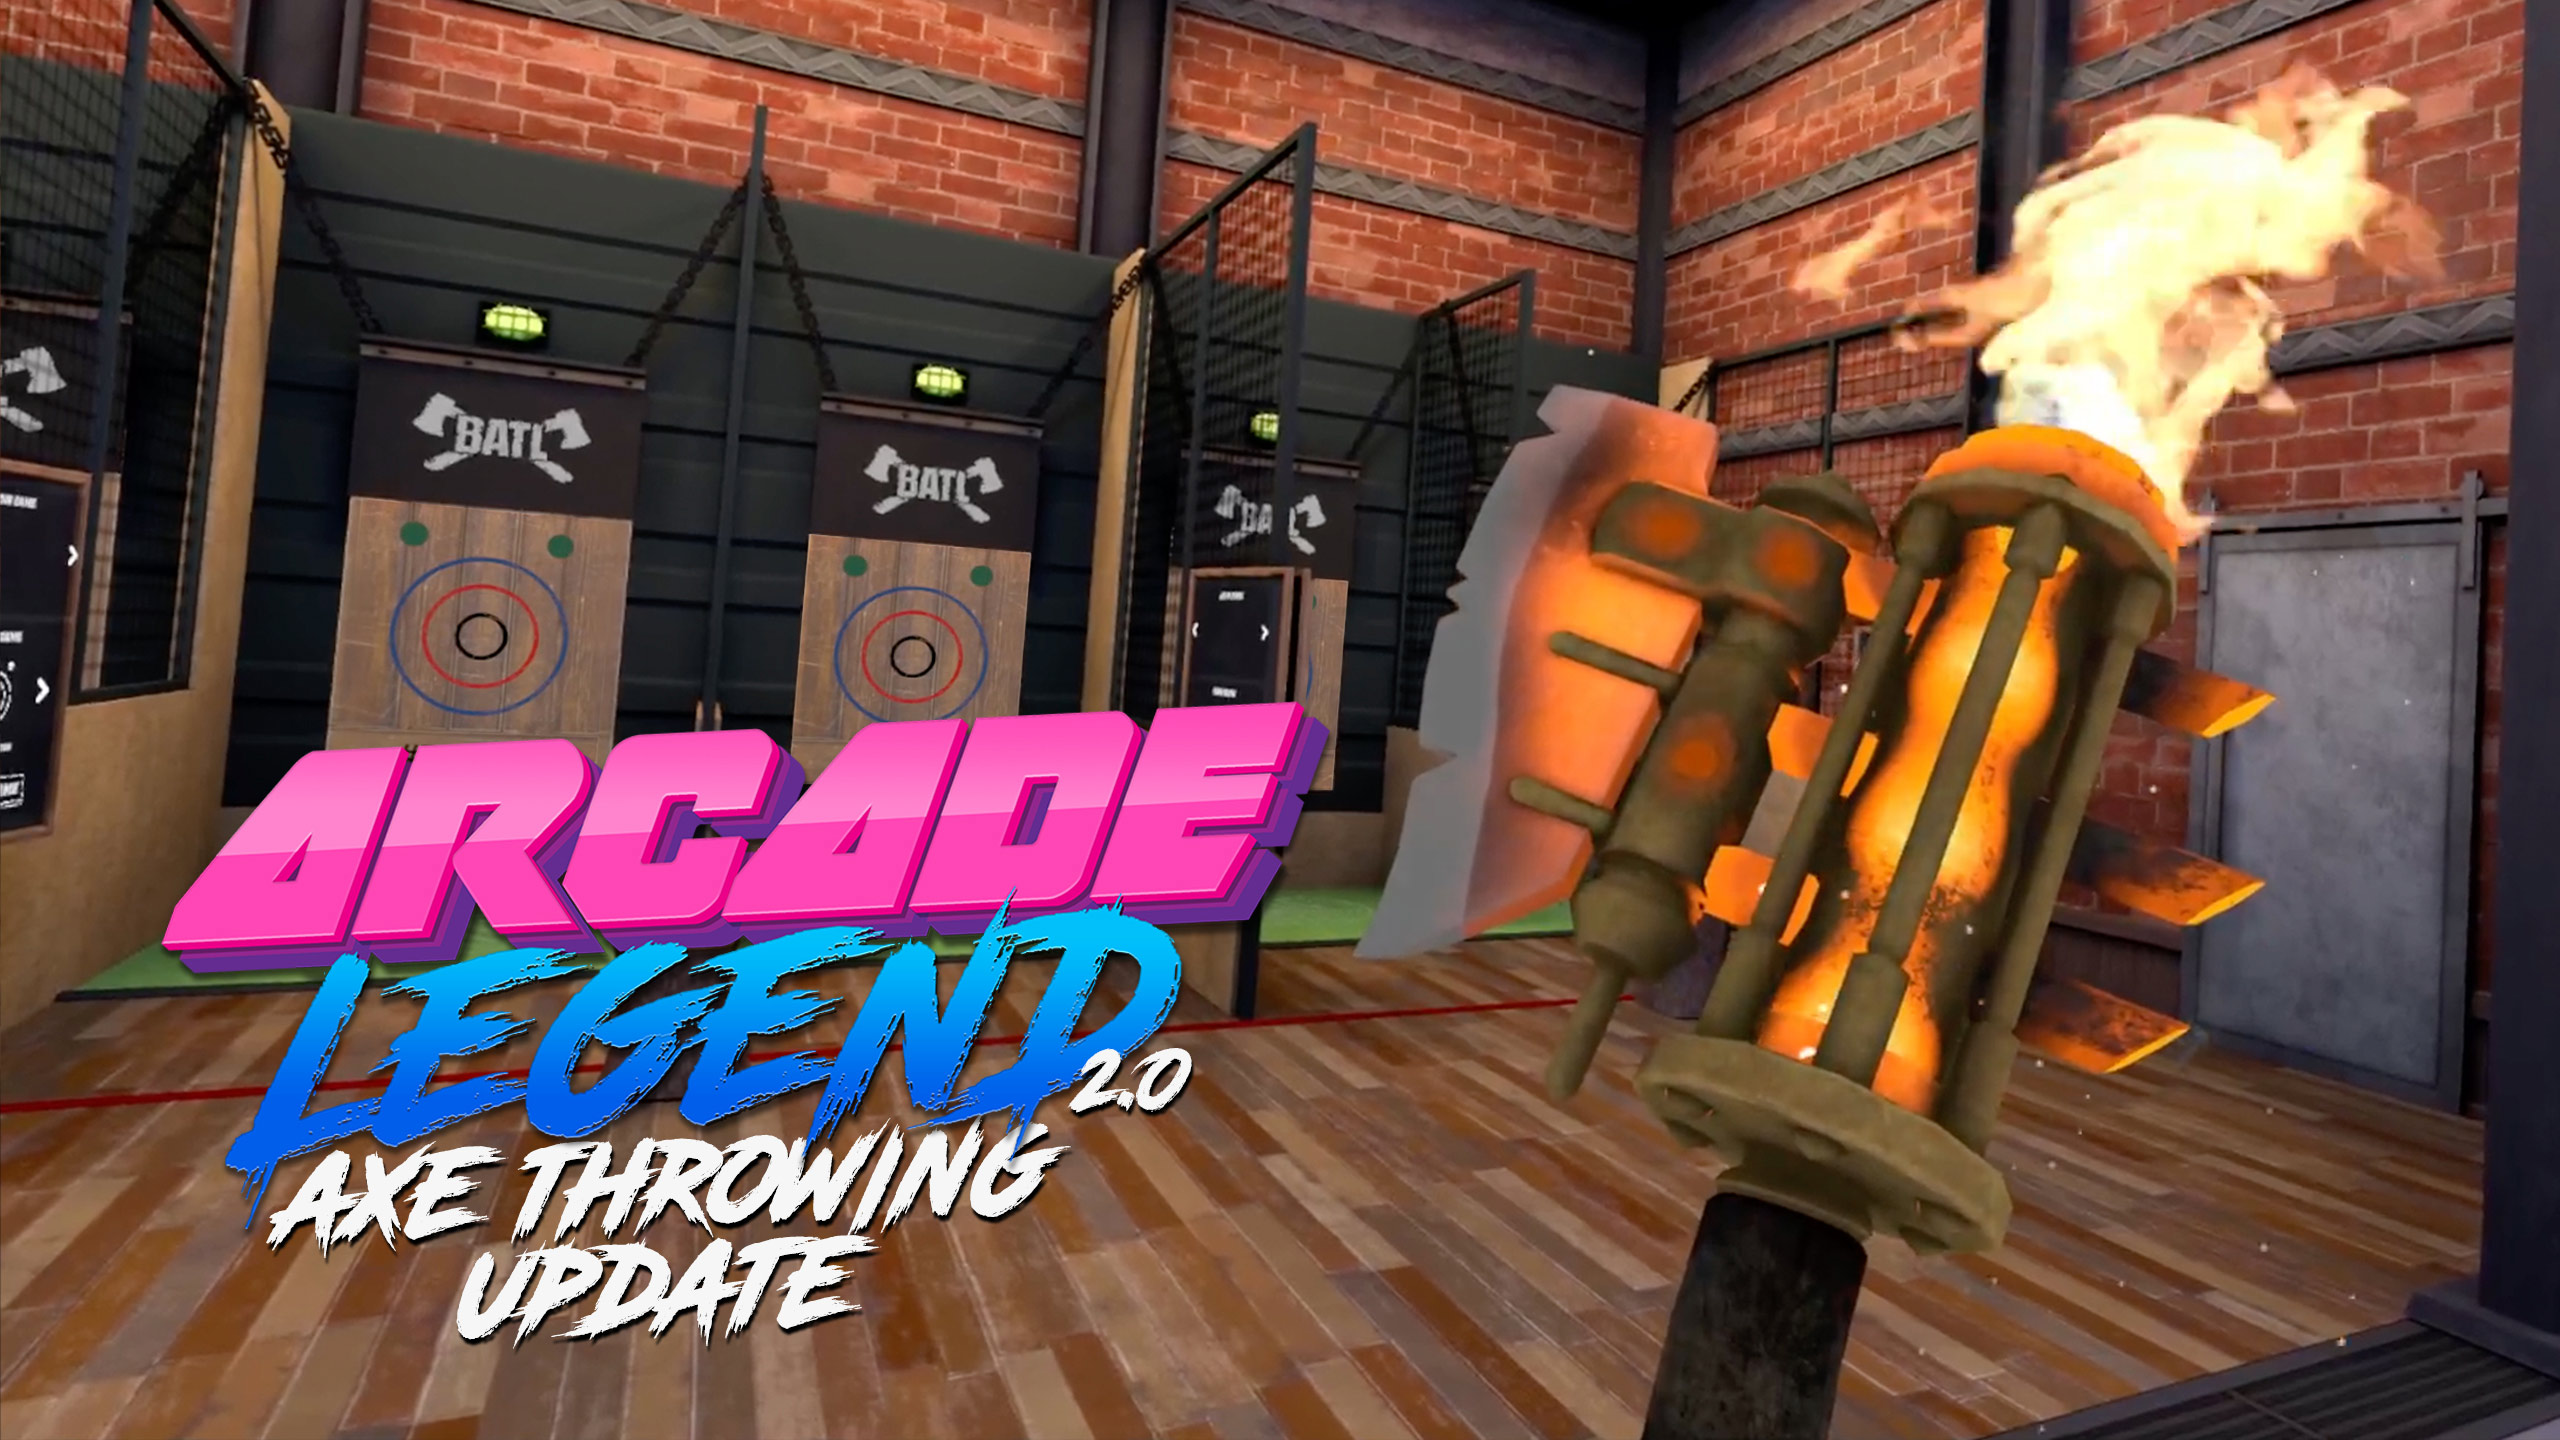 The First Official VR Axe Throwing Experience - Arcade Legend VR